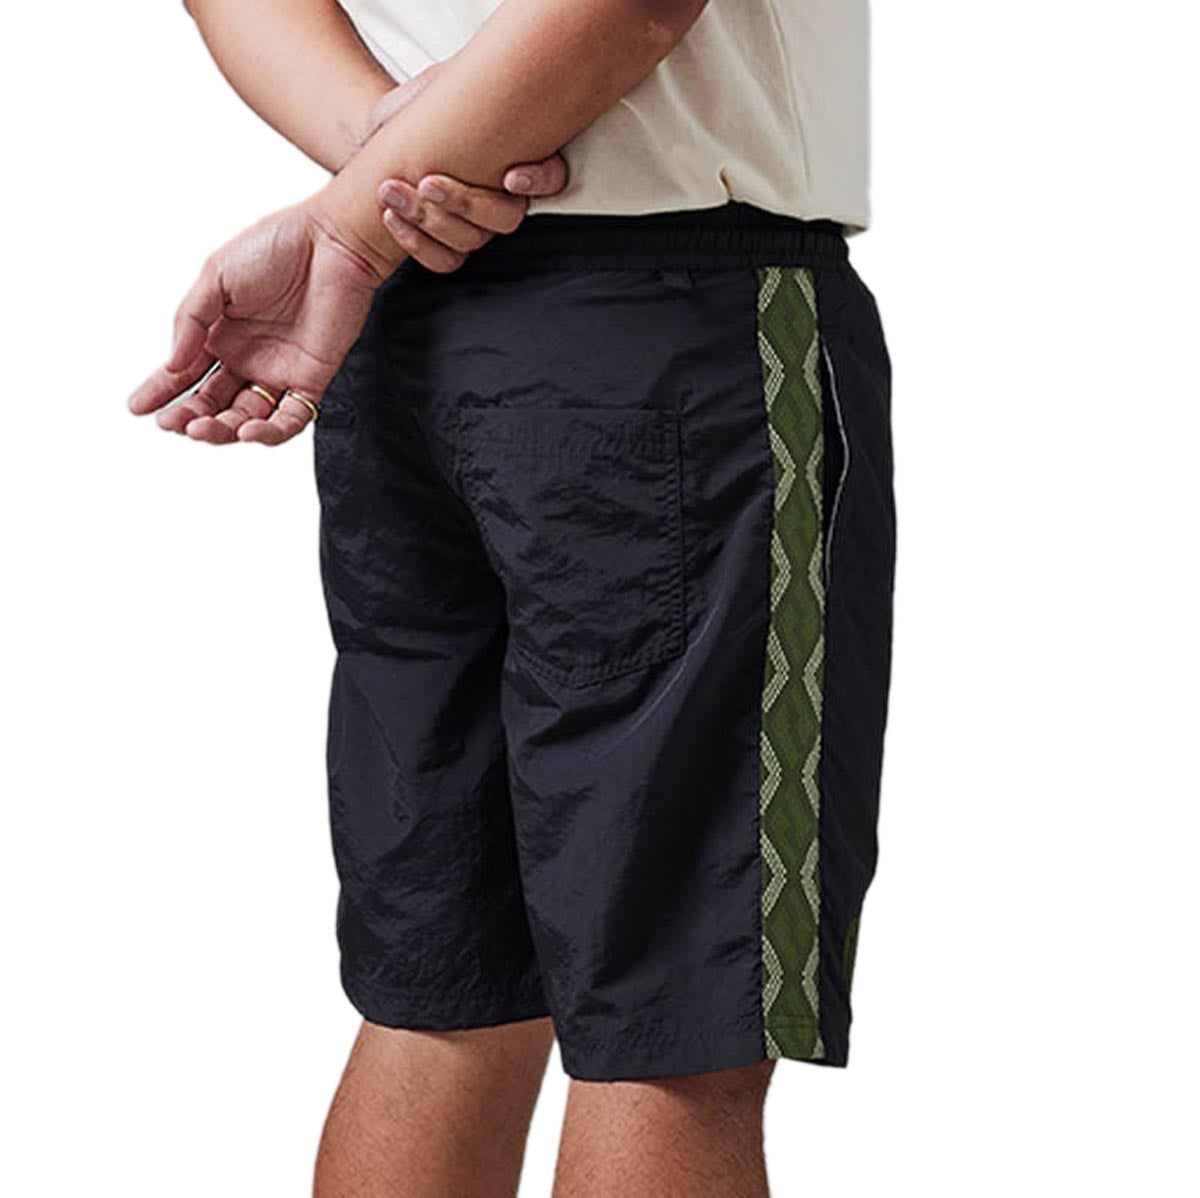 Passport Coiled RPET Casual Shorts - Black image 4